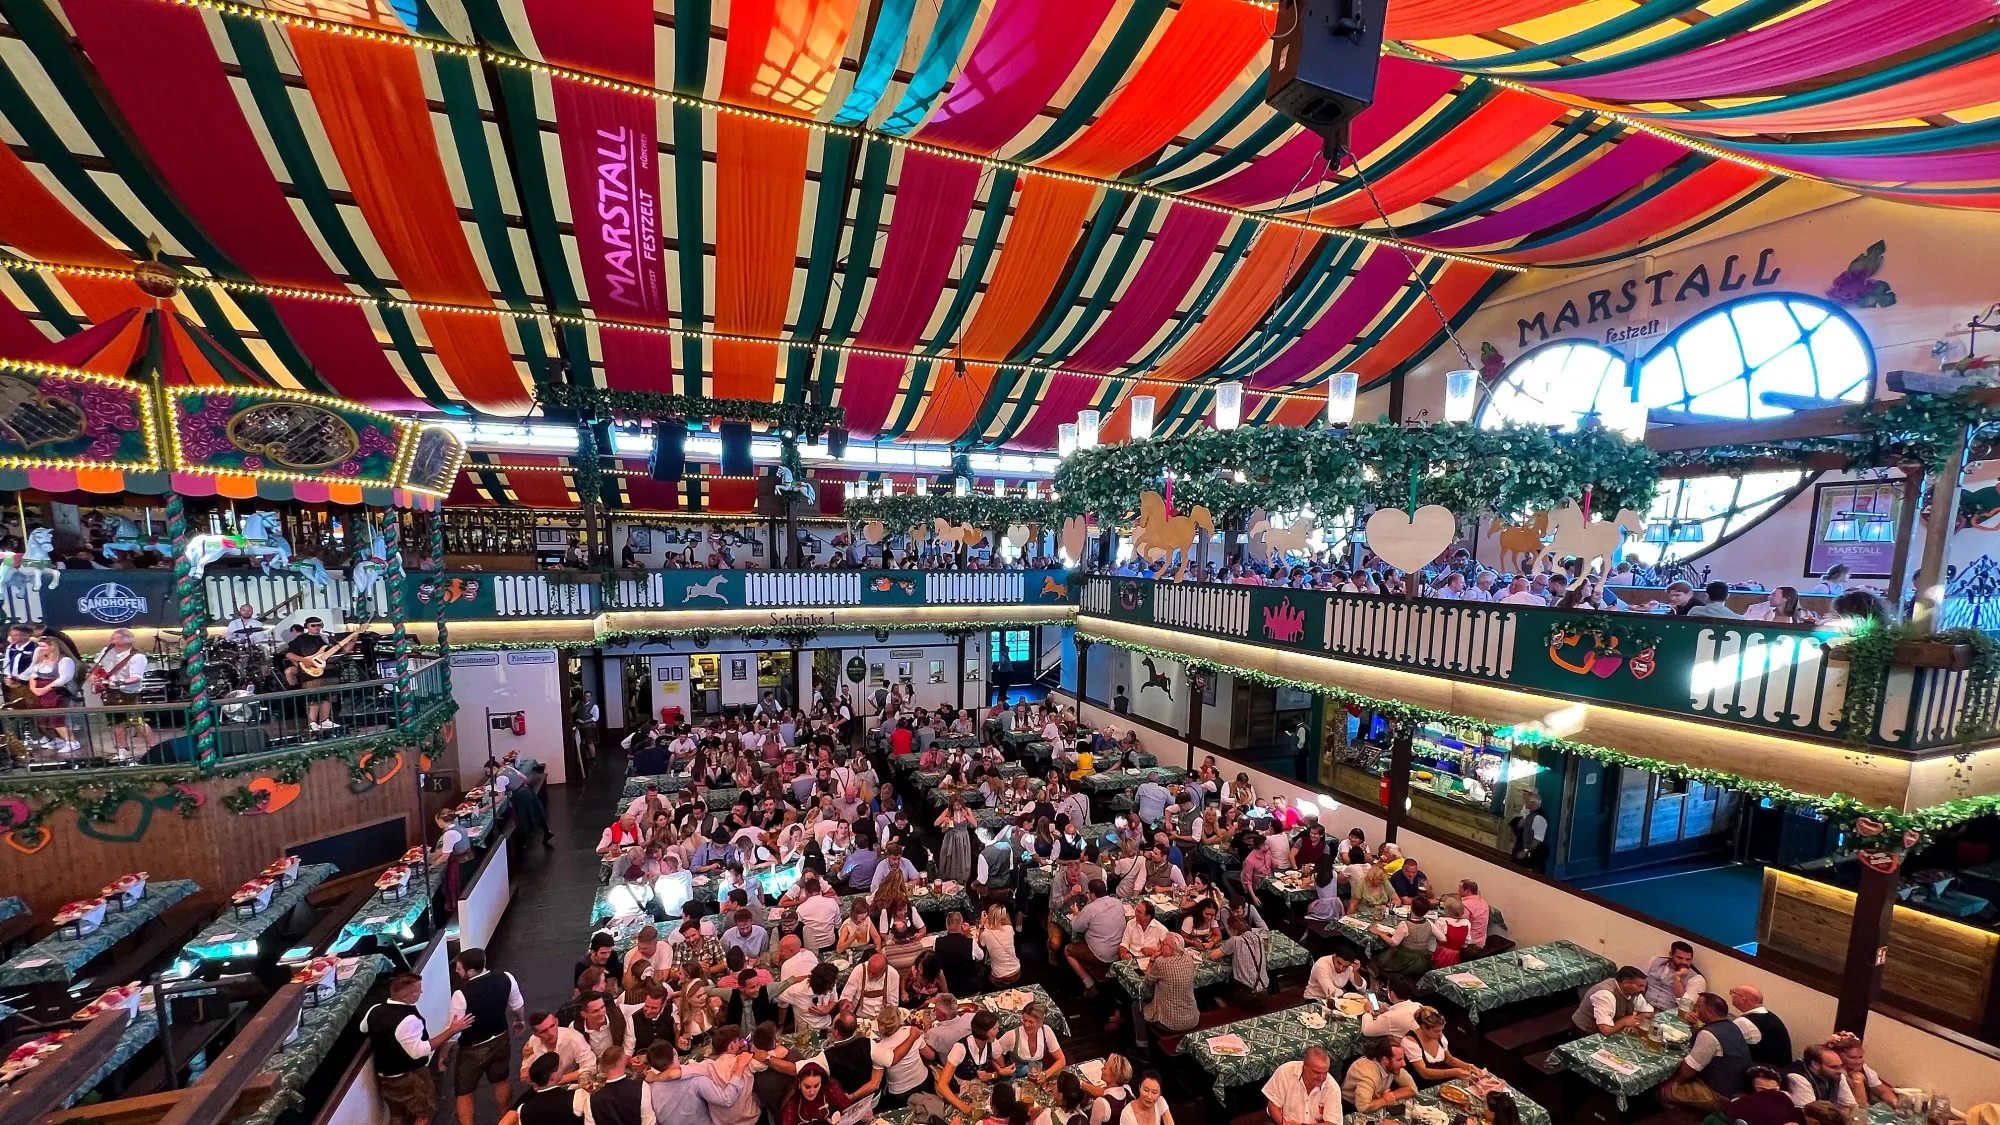 Two story tent filled with people drinking at the tables and with a pink/orange streamer covered ceiling